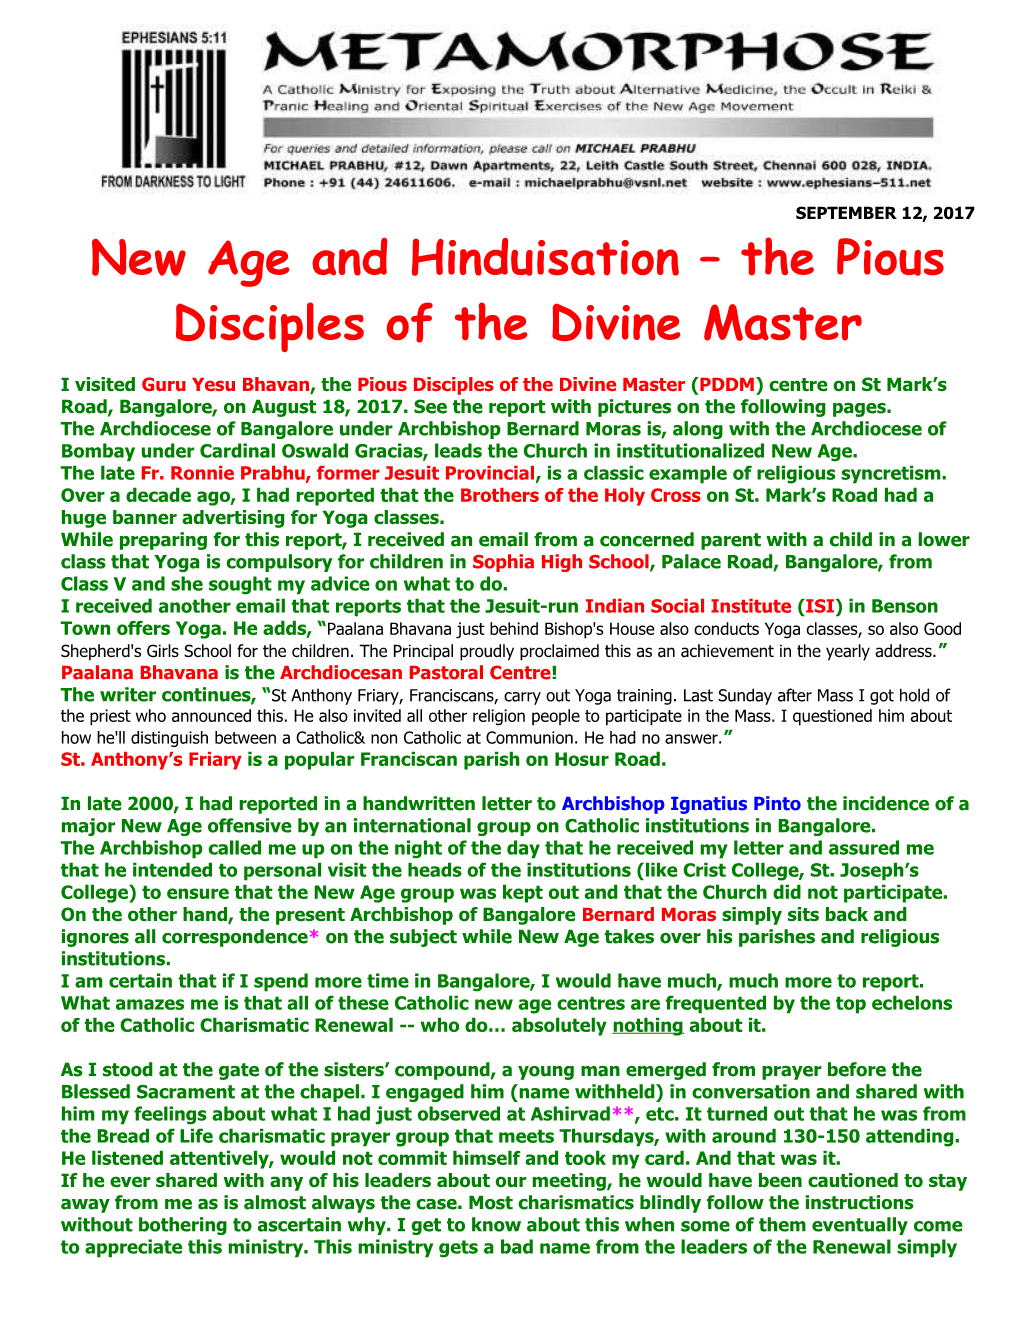 New Age and Hinduisation the Pious Disciples of the Divine Master